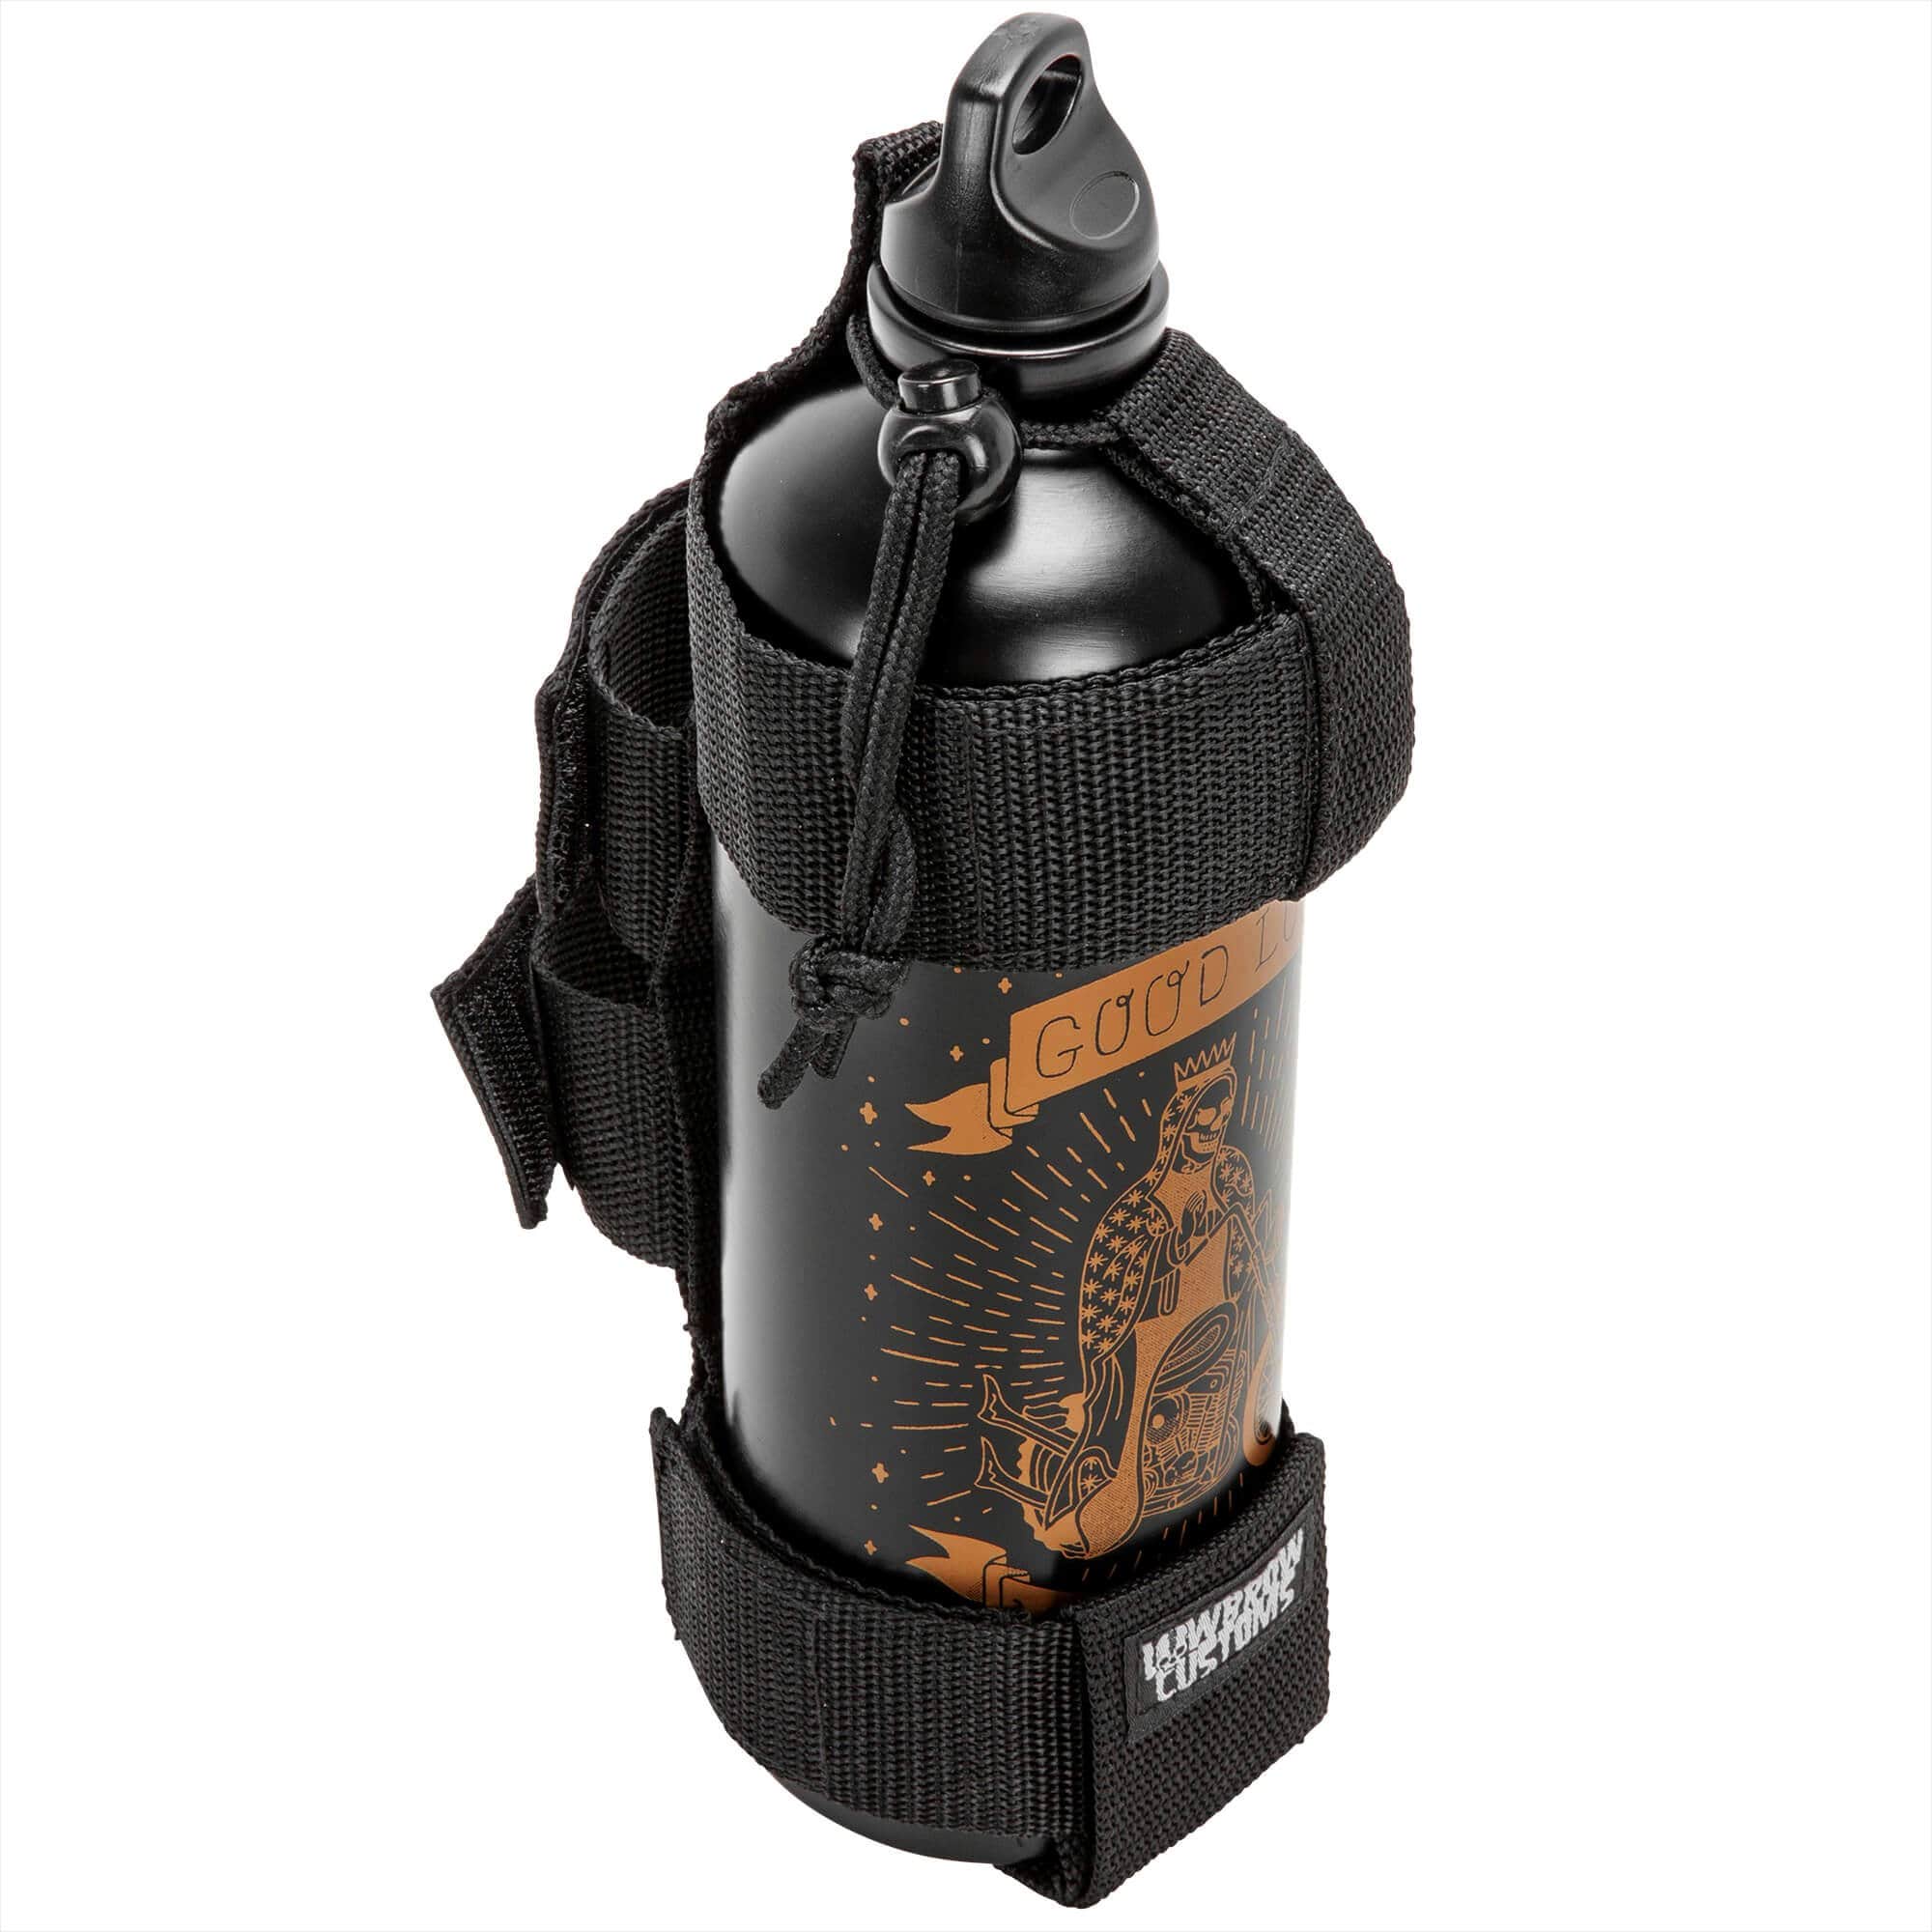 Fuel Friend Fuel Canisters - Handy Motorcycle Fuel Bottles